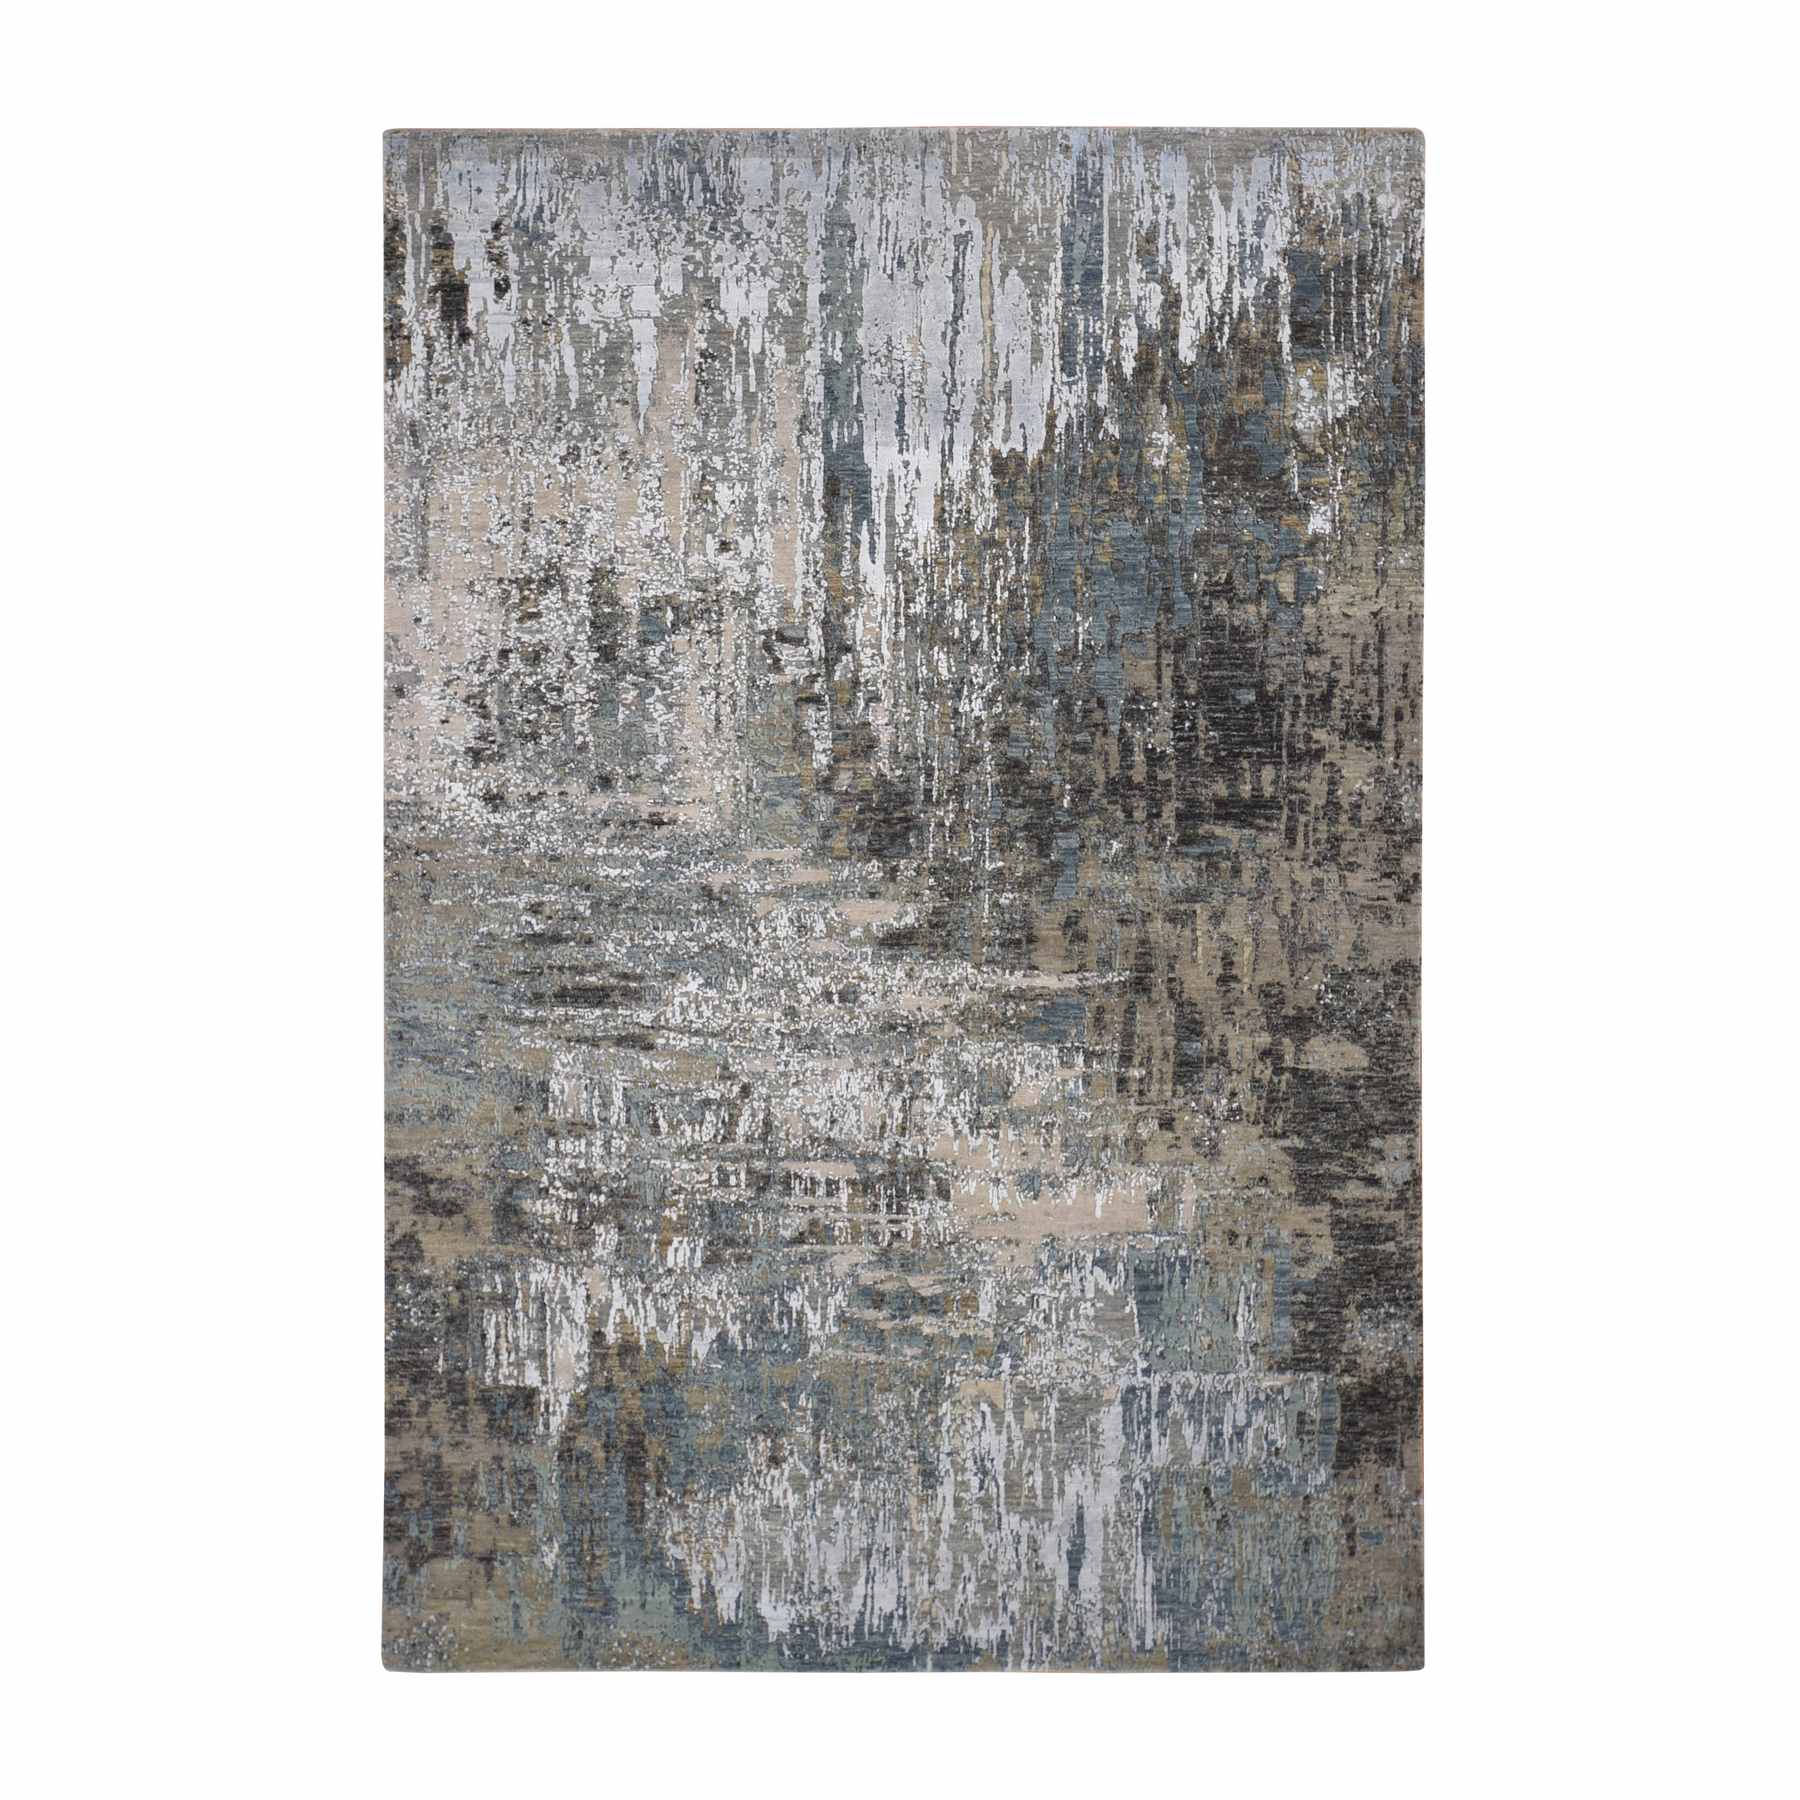 Modern-and-Contemporary-Hand-Knotted-Rug-401335